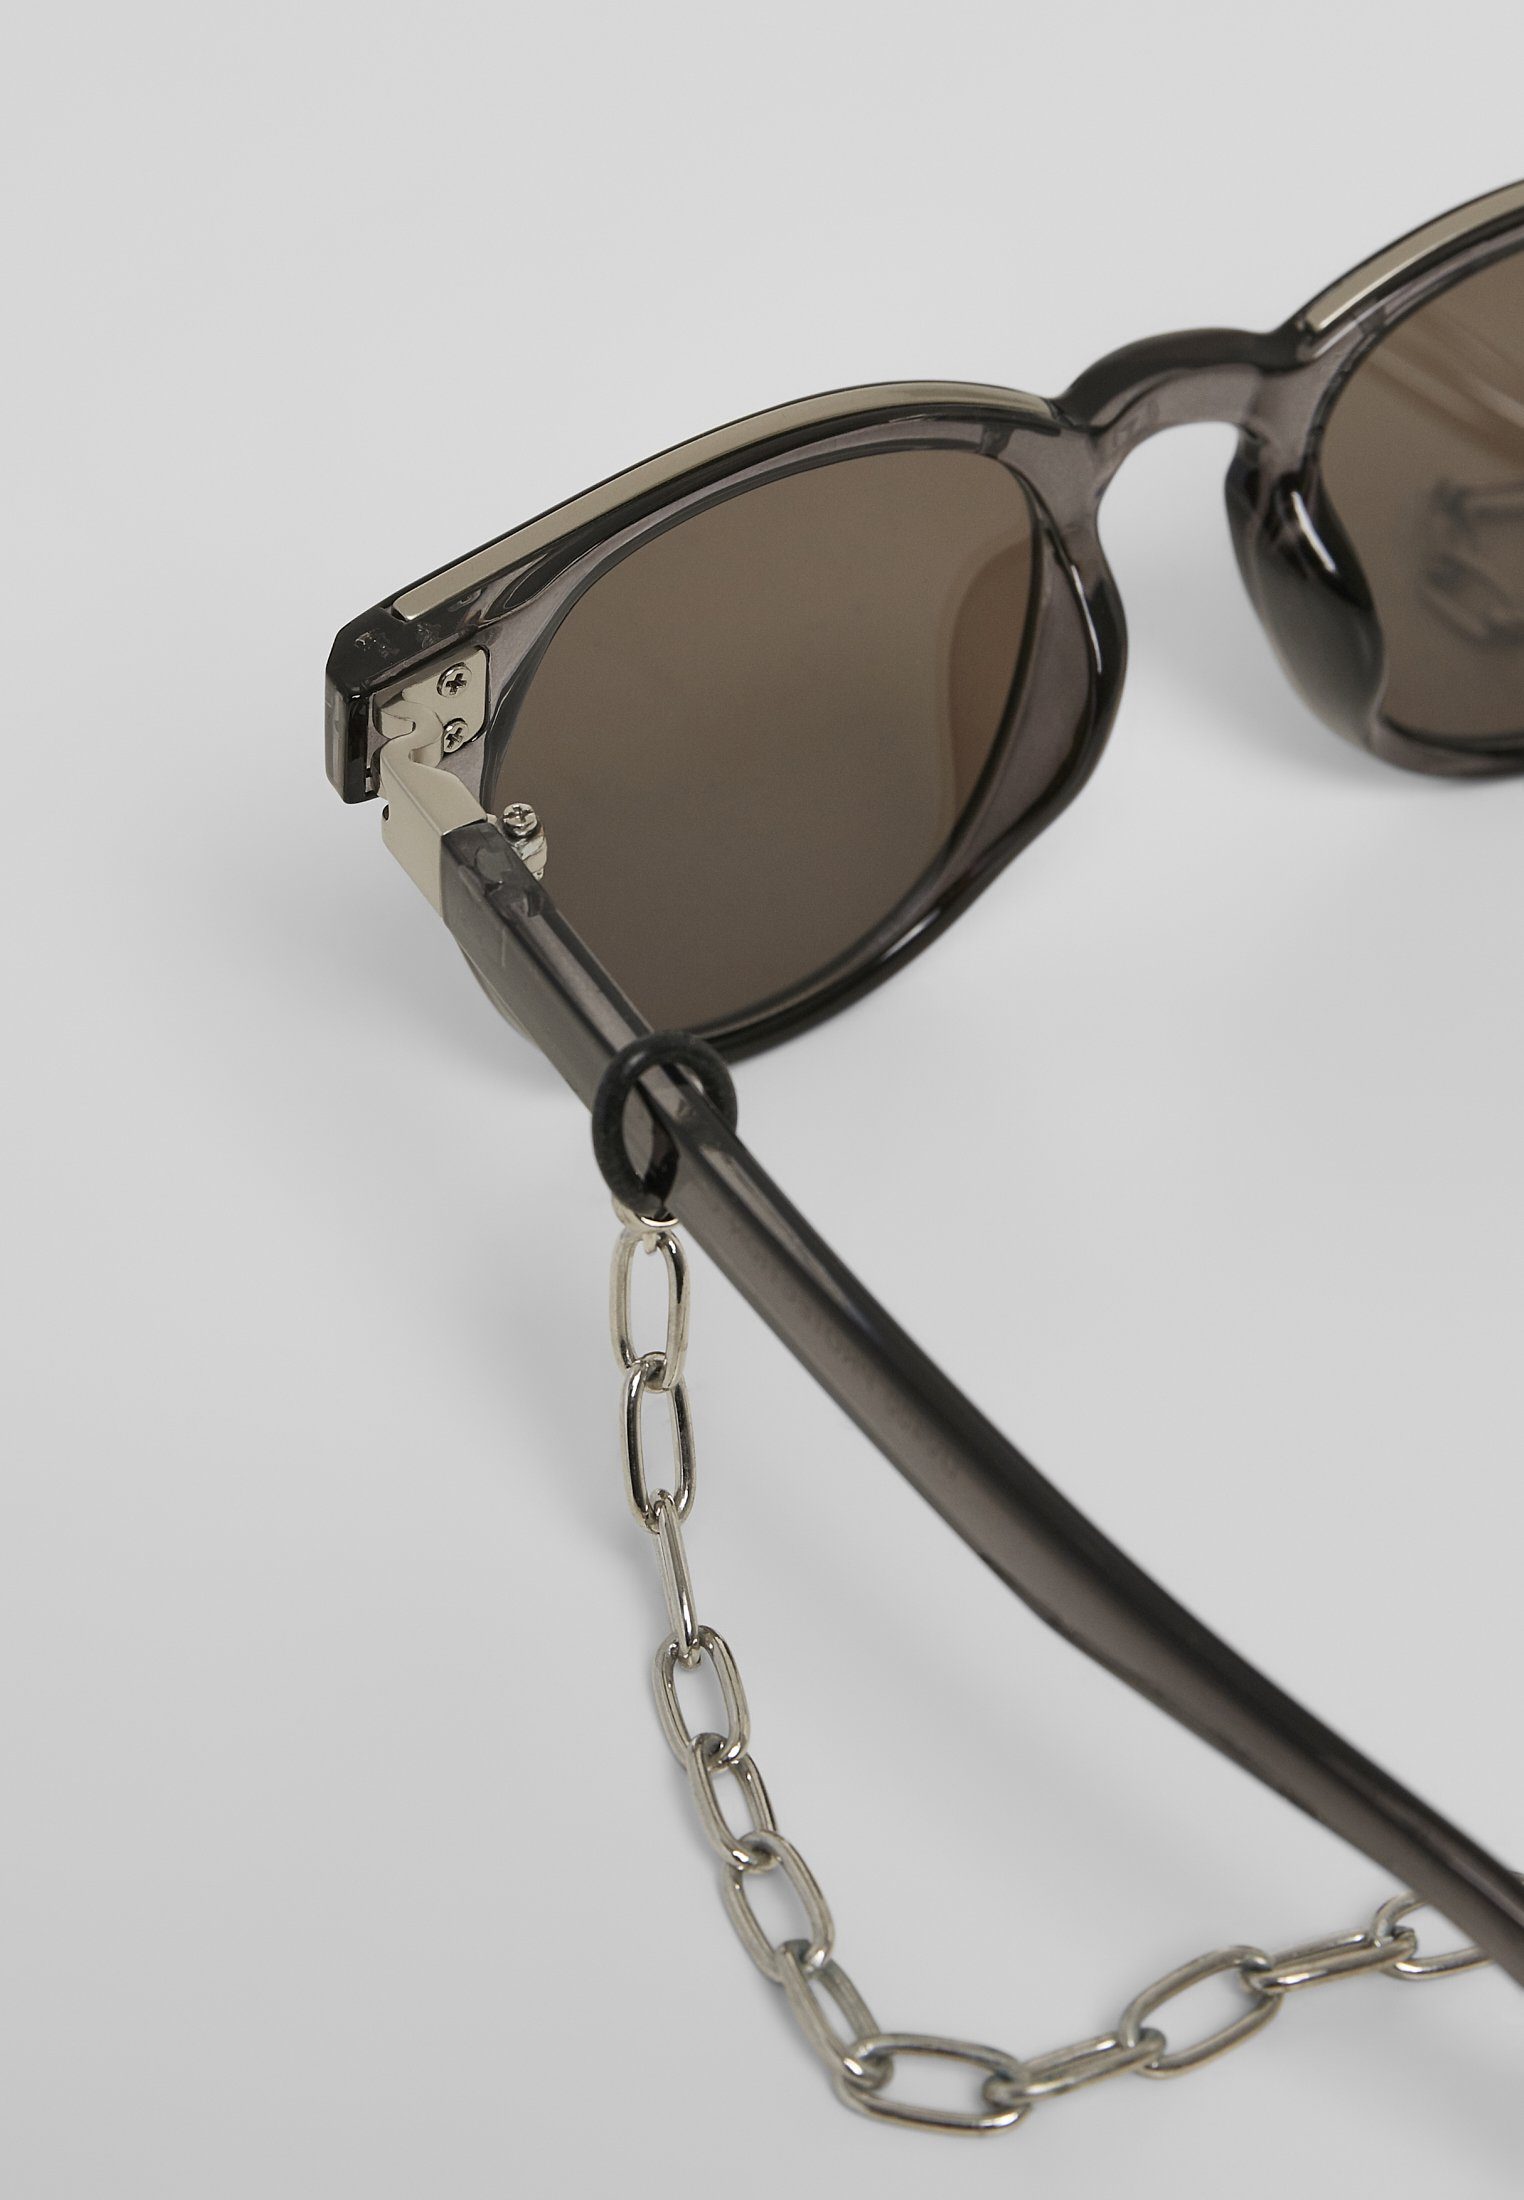 Sonnenbrille Italy URBAN grey/silver/silver Sunglasses CLASSICS with chain Unisex